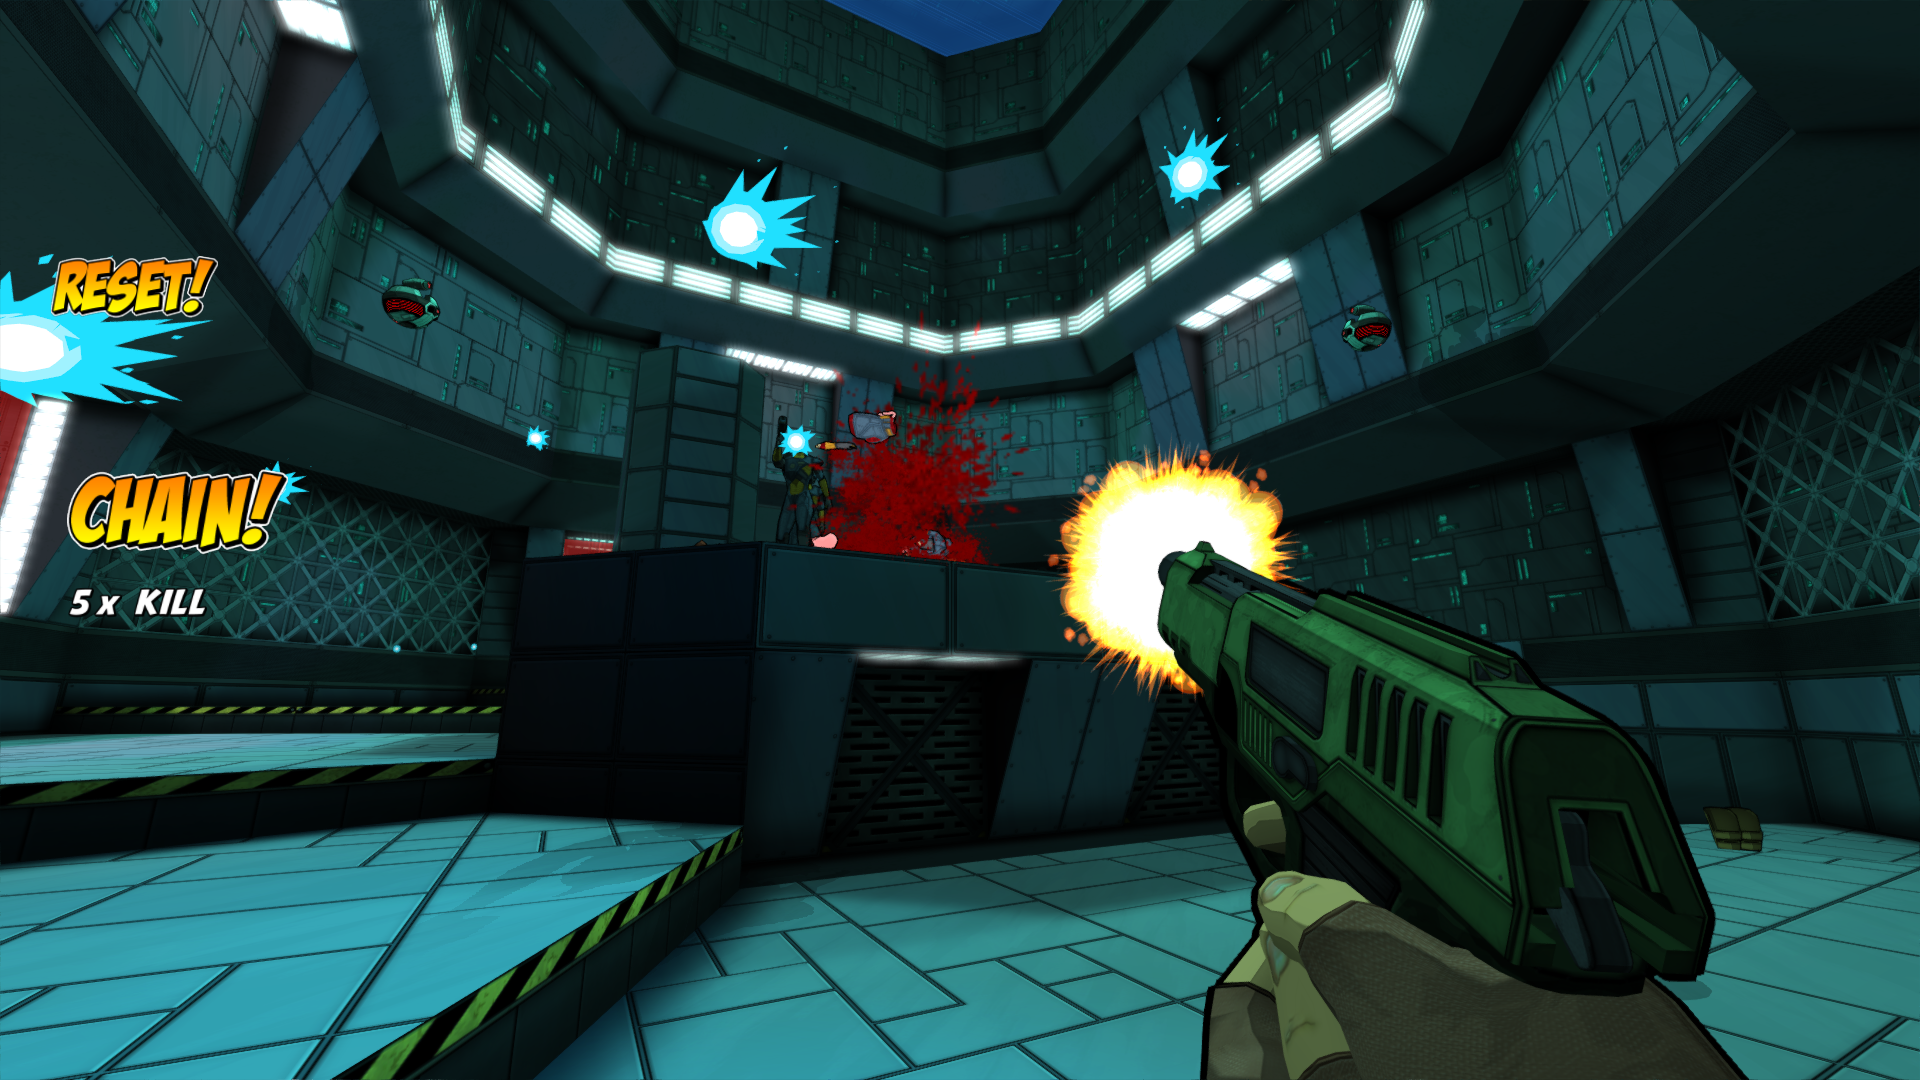 Wrack is an old school first-person shooter with a Mega Man aesthetic PC Gamer